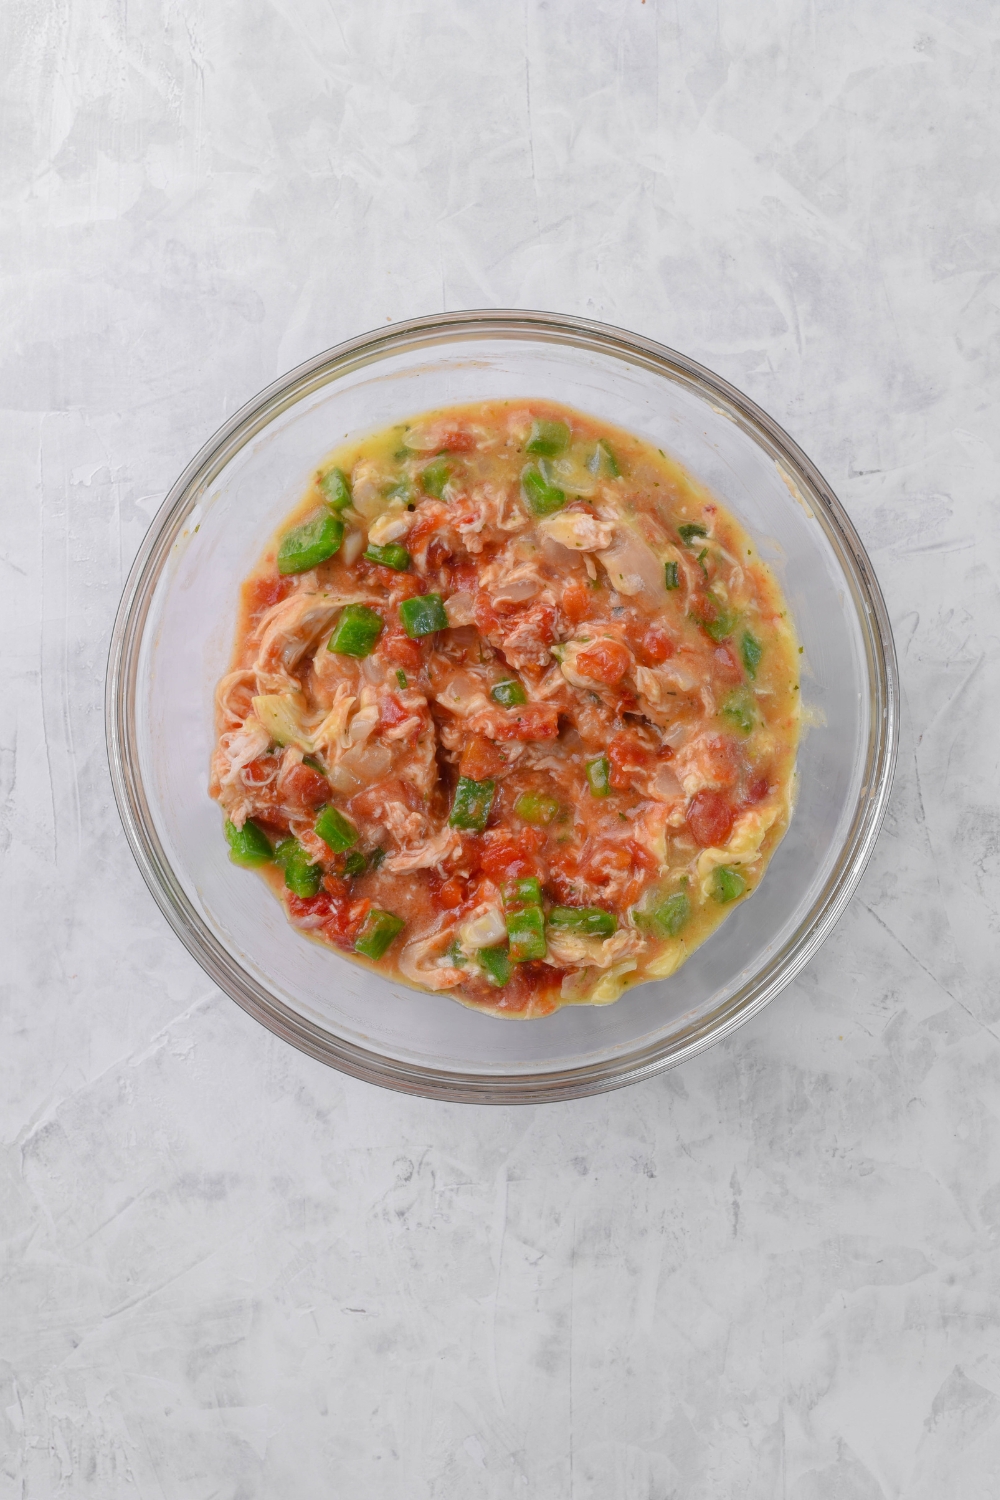 A clear bowl filled with diced peppers, onions, shredded chicken, and diced tomatoes in a creamy sauce.